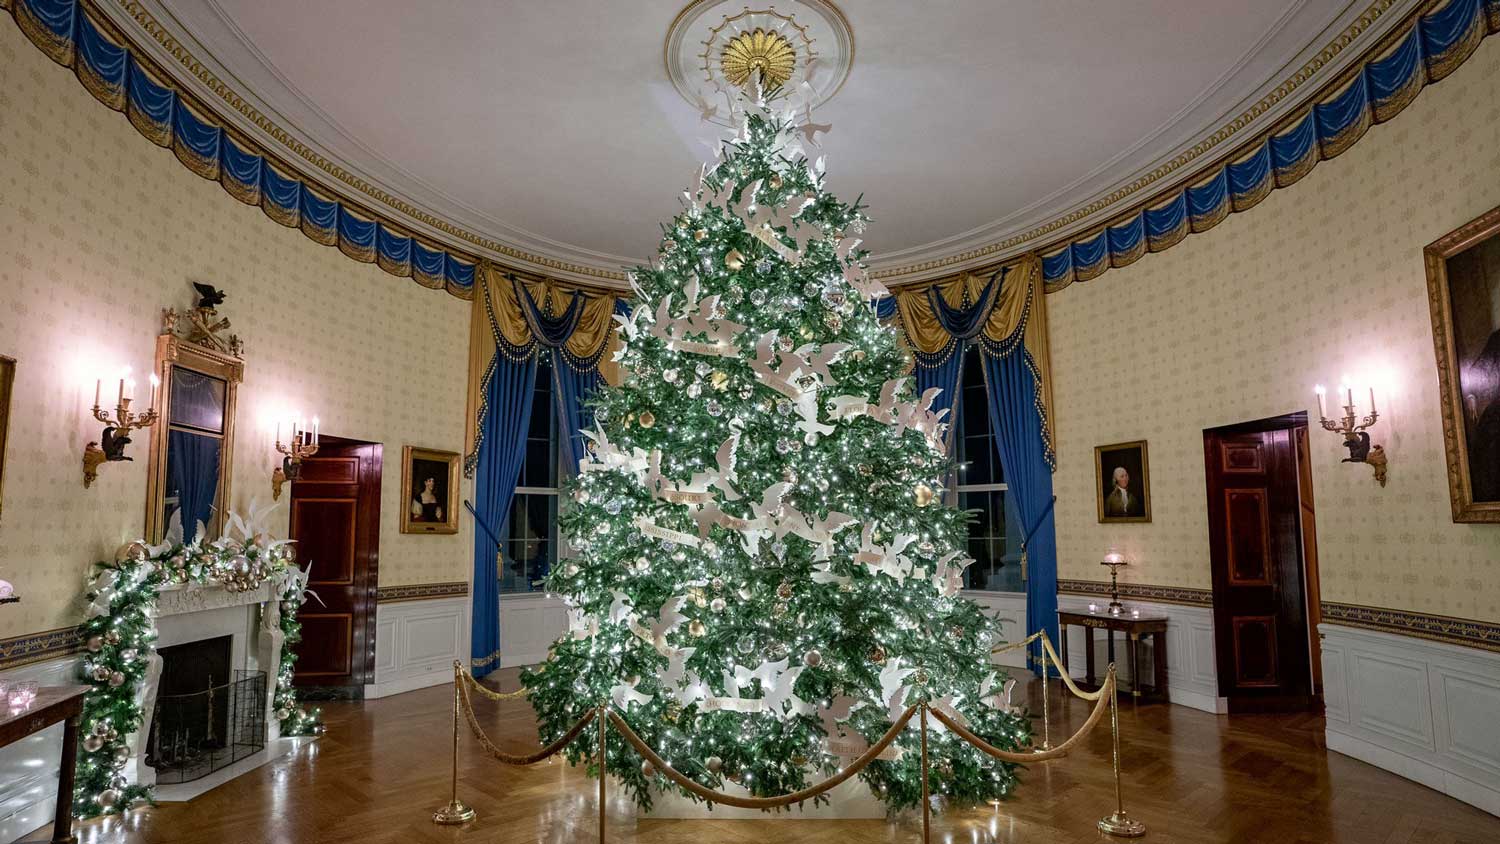 The official 2021 White House Christmas tree on display in the the Blue Room